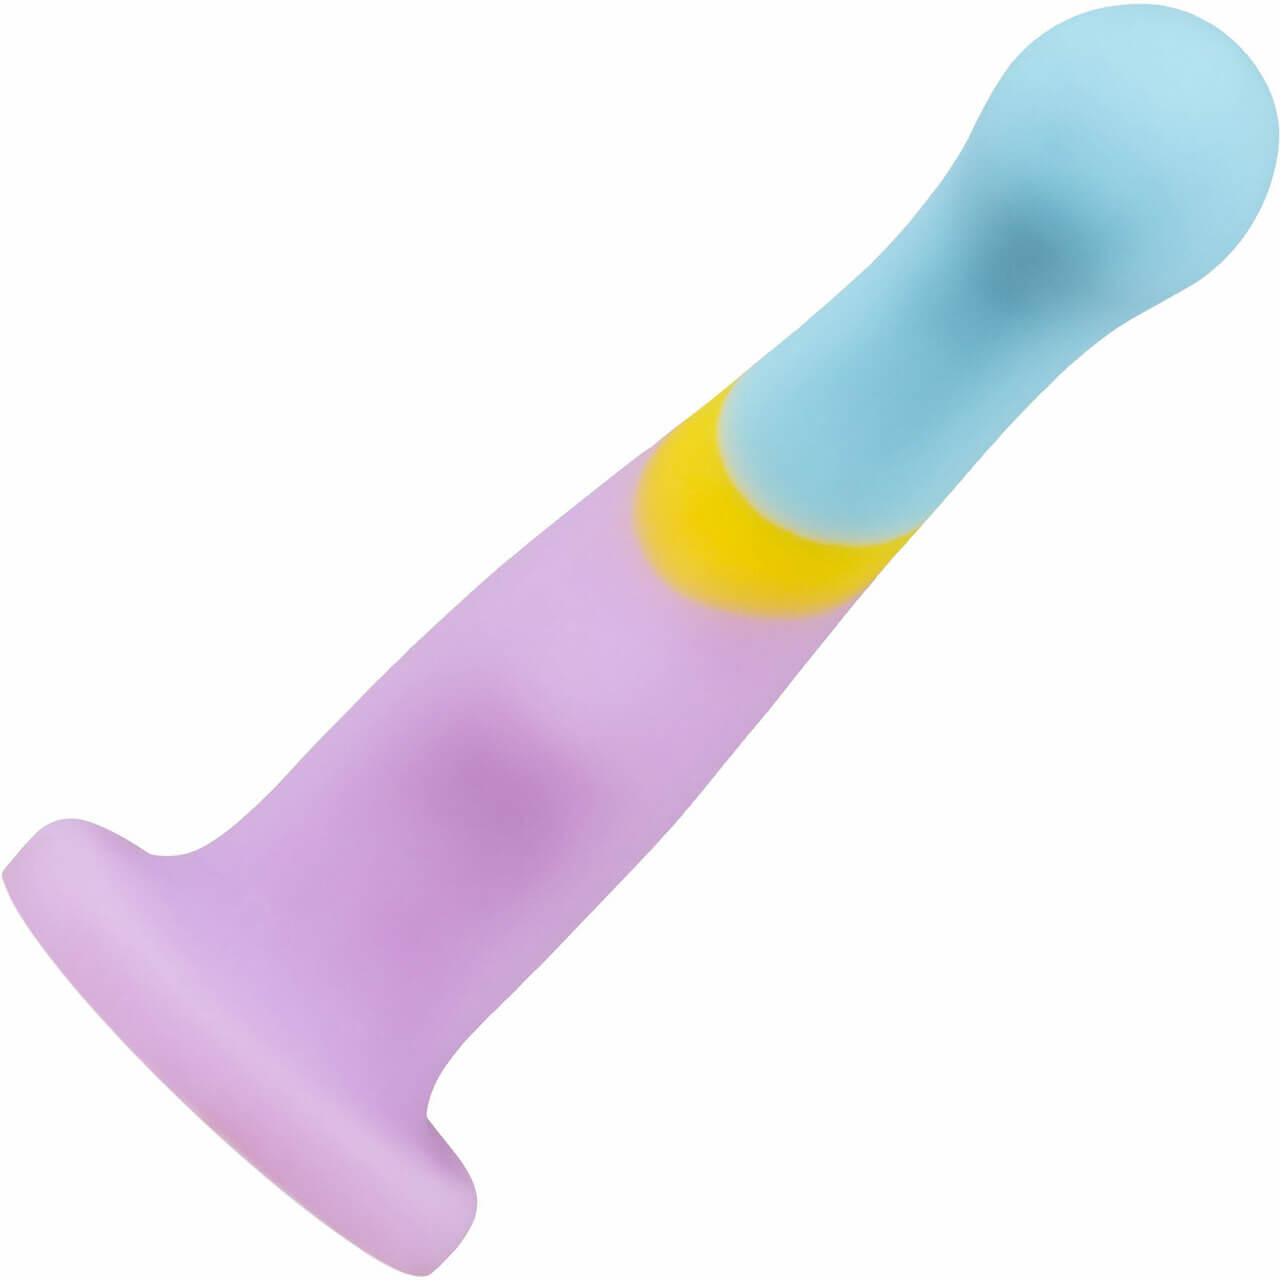 Avant D14 Heart of Gold Dildo - Blush Novelties - by  The Bigger O - online sex toy shop USA, Canada & UK shipping available